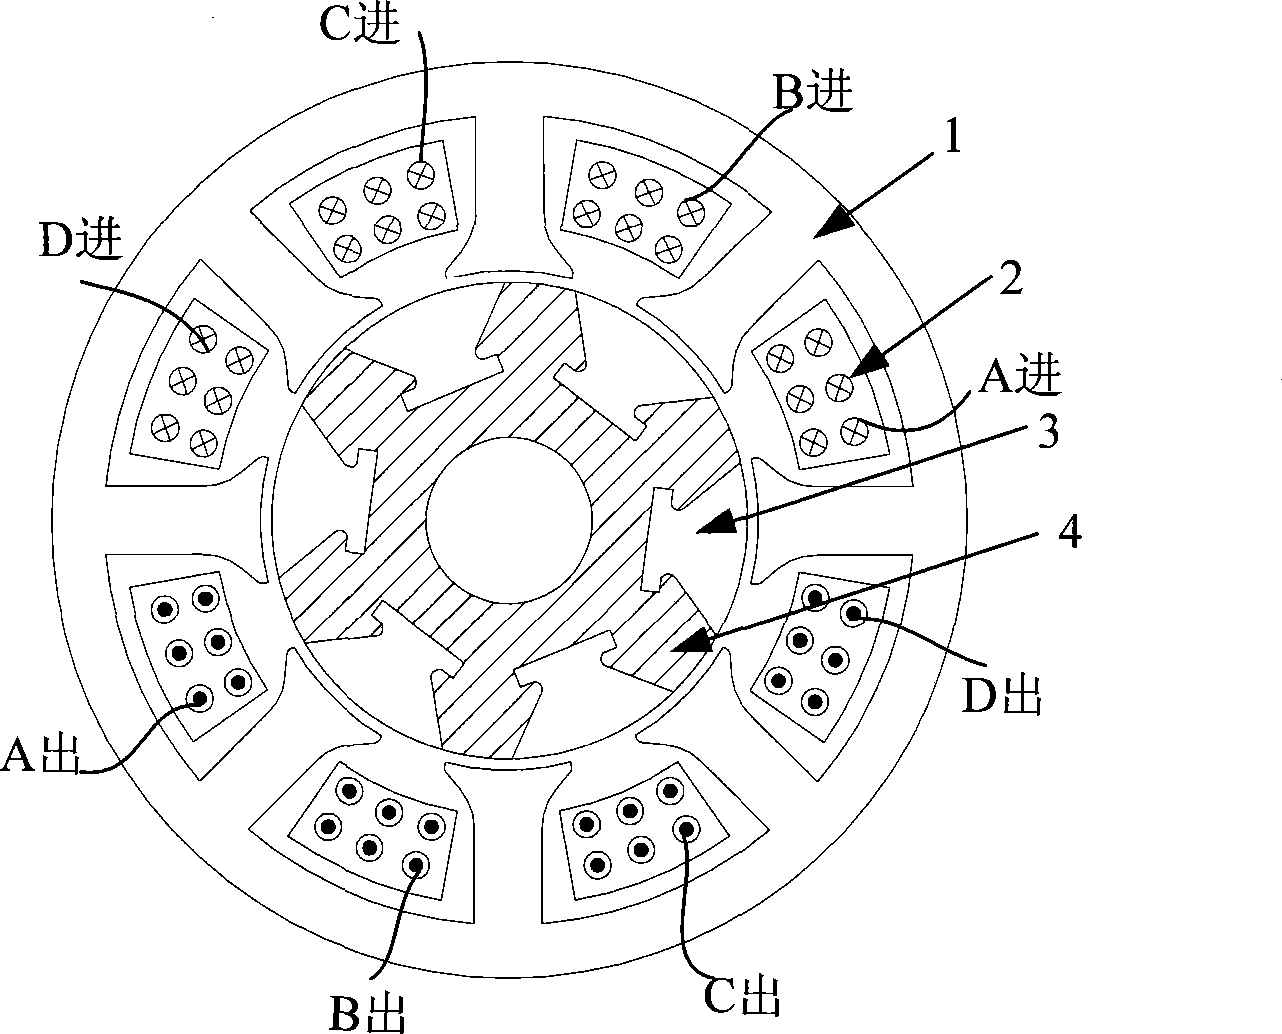 Switched reluctance motor with bipolar excitation 8/6 structure sectional rotor